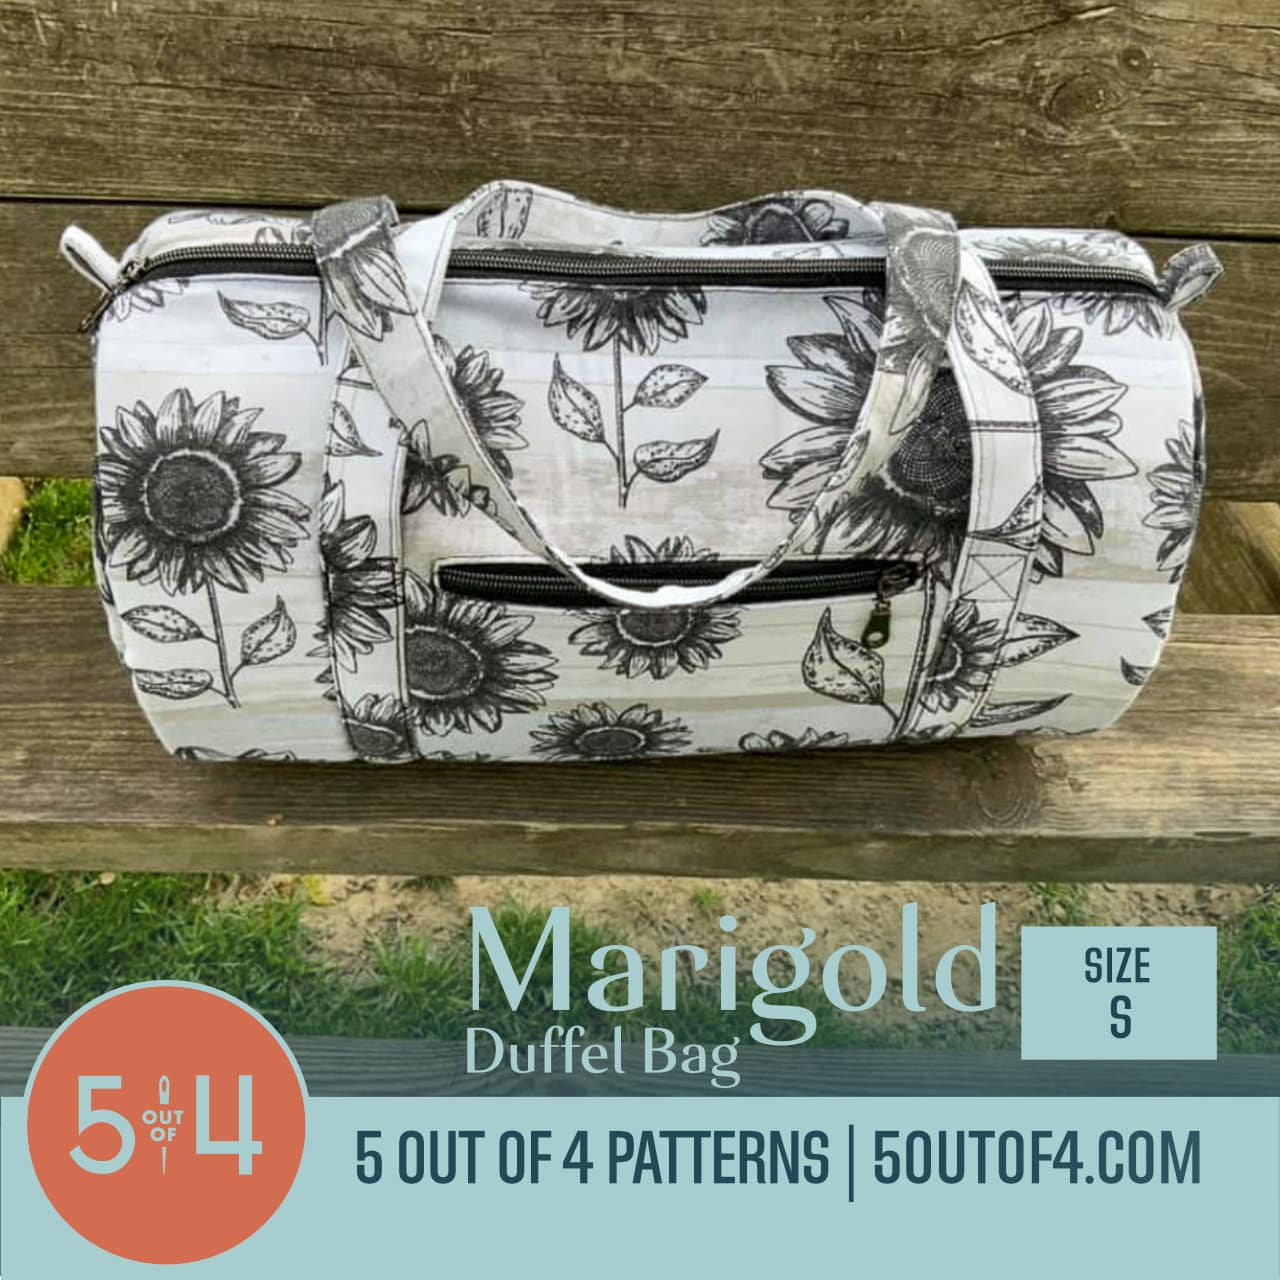 Marigold Duffel Bag - 5 out of 4 Patterns